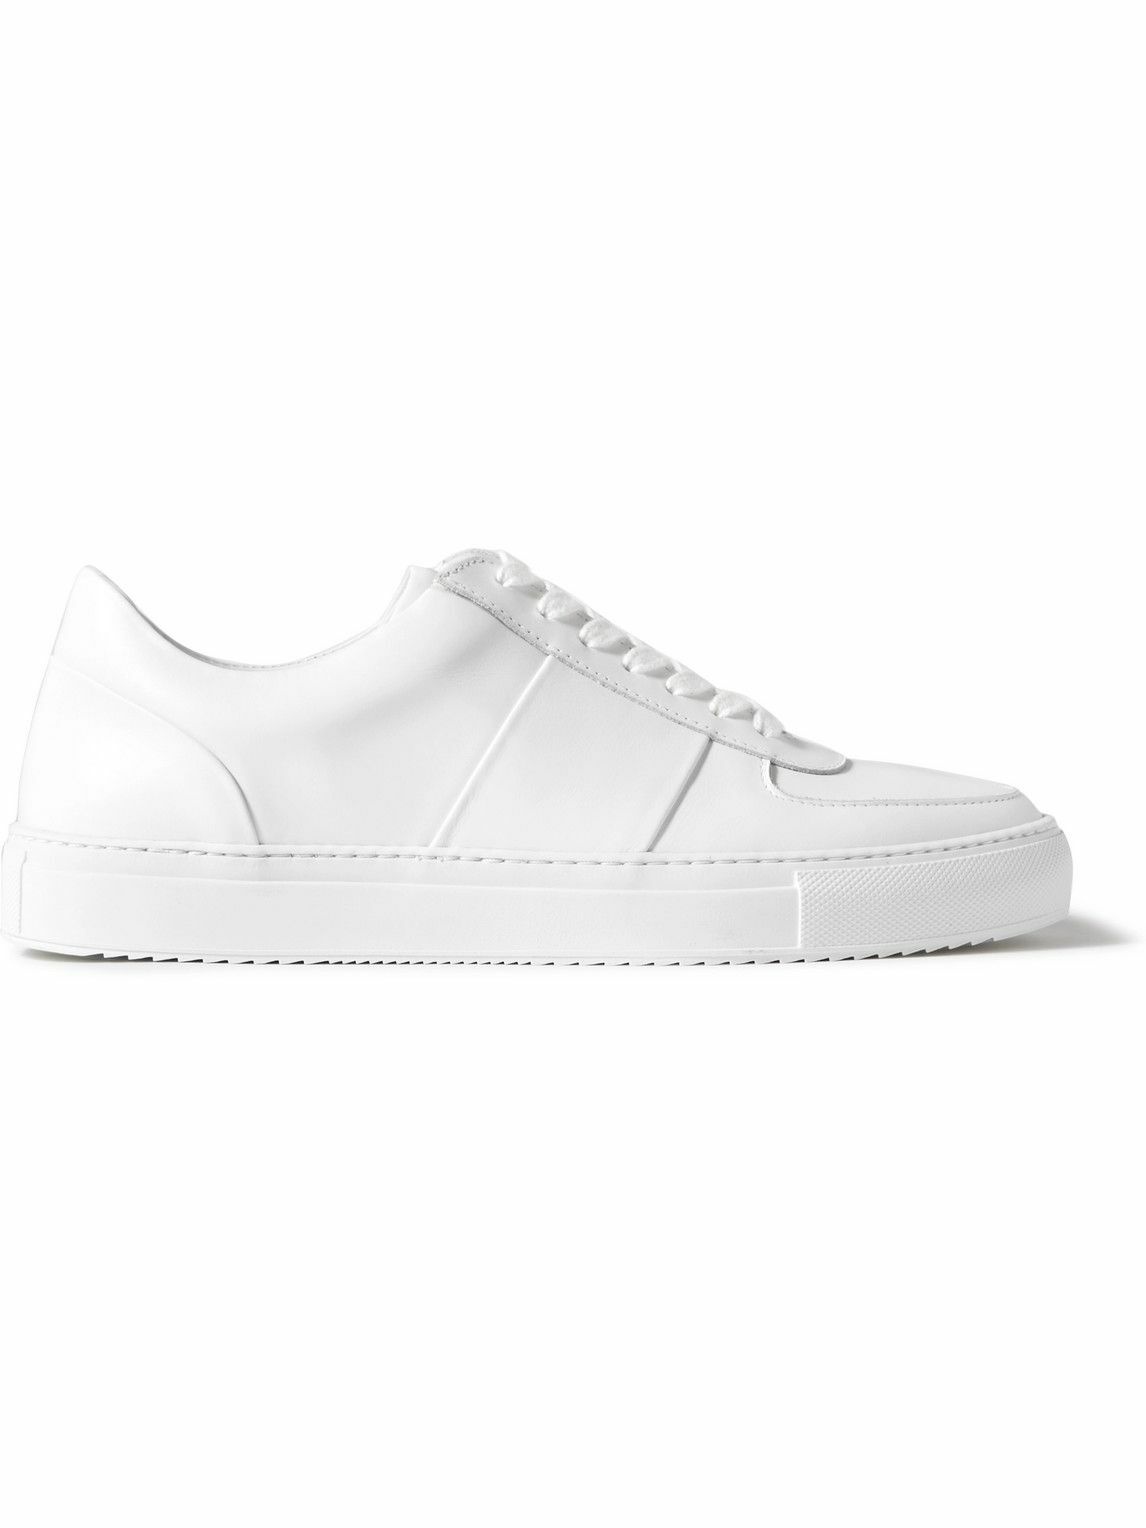 Mr P. - Larry Leather Sneakers - White Mr P.